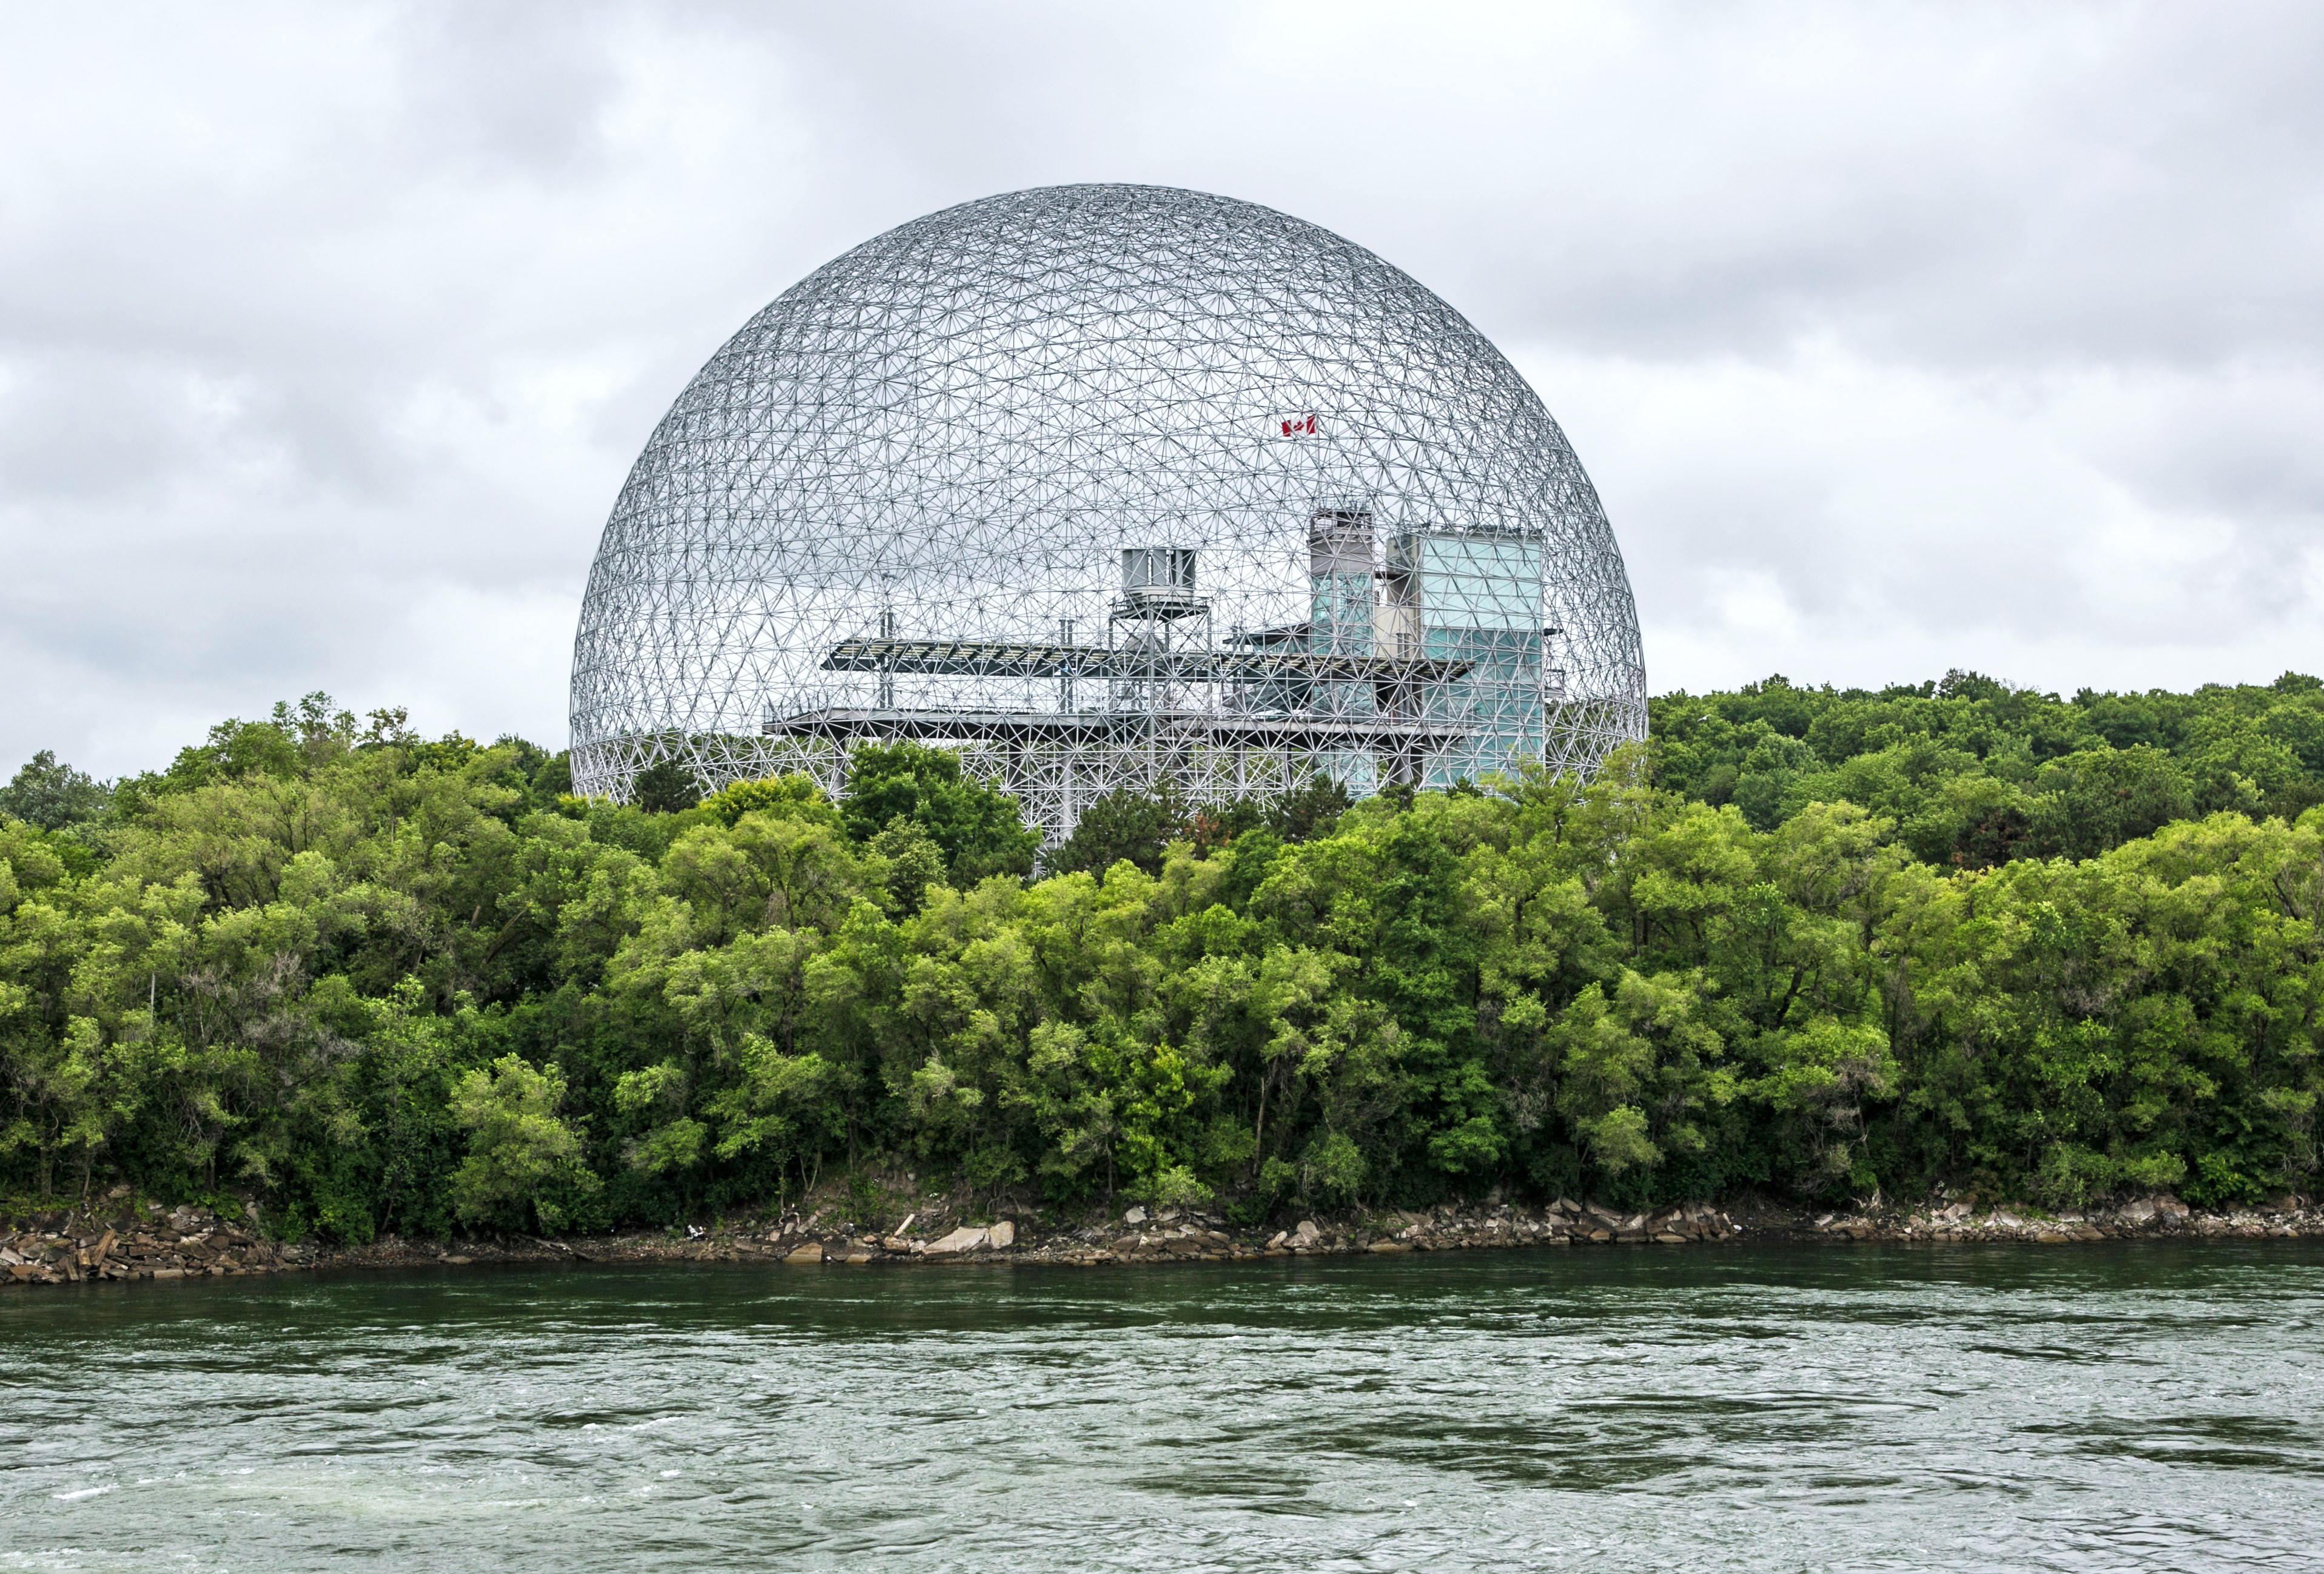 Buckminster Fuller's Geodesic Dome and Futuristic Architecture ...